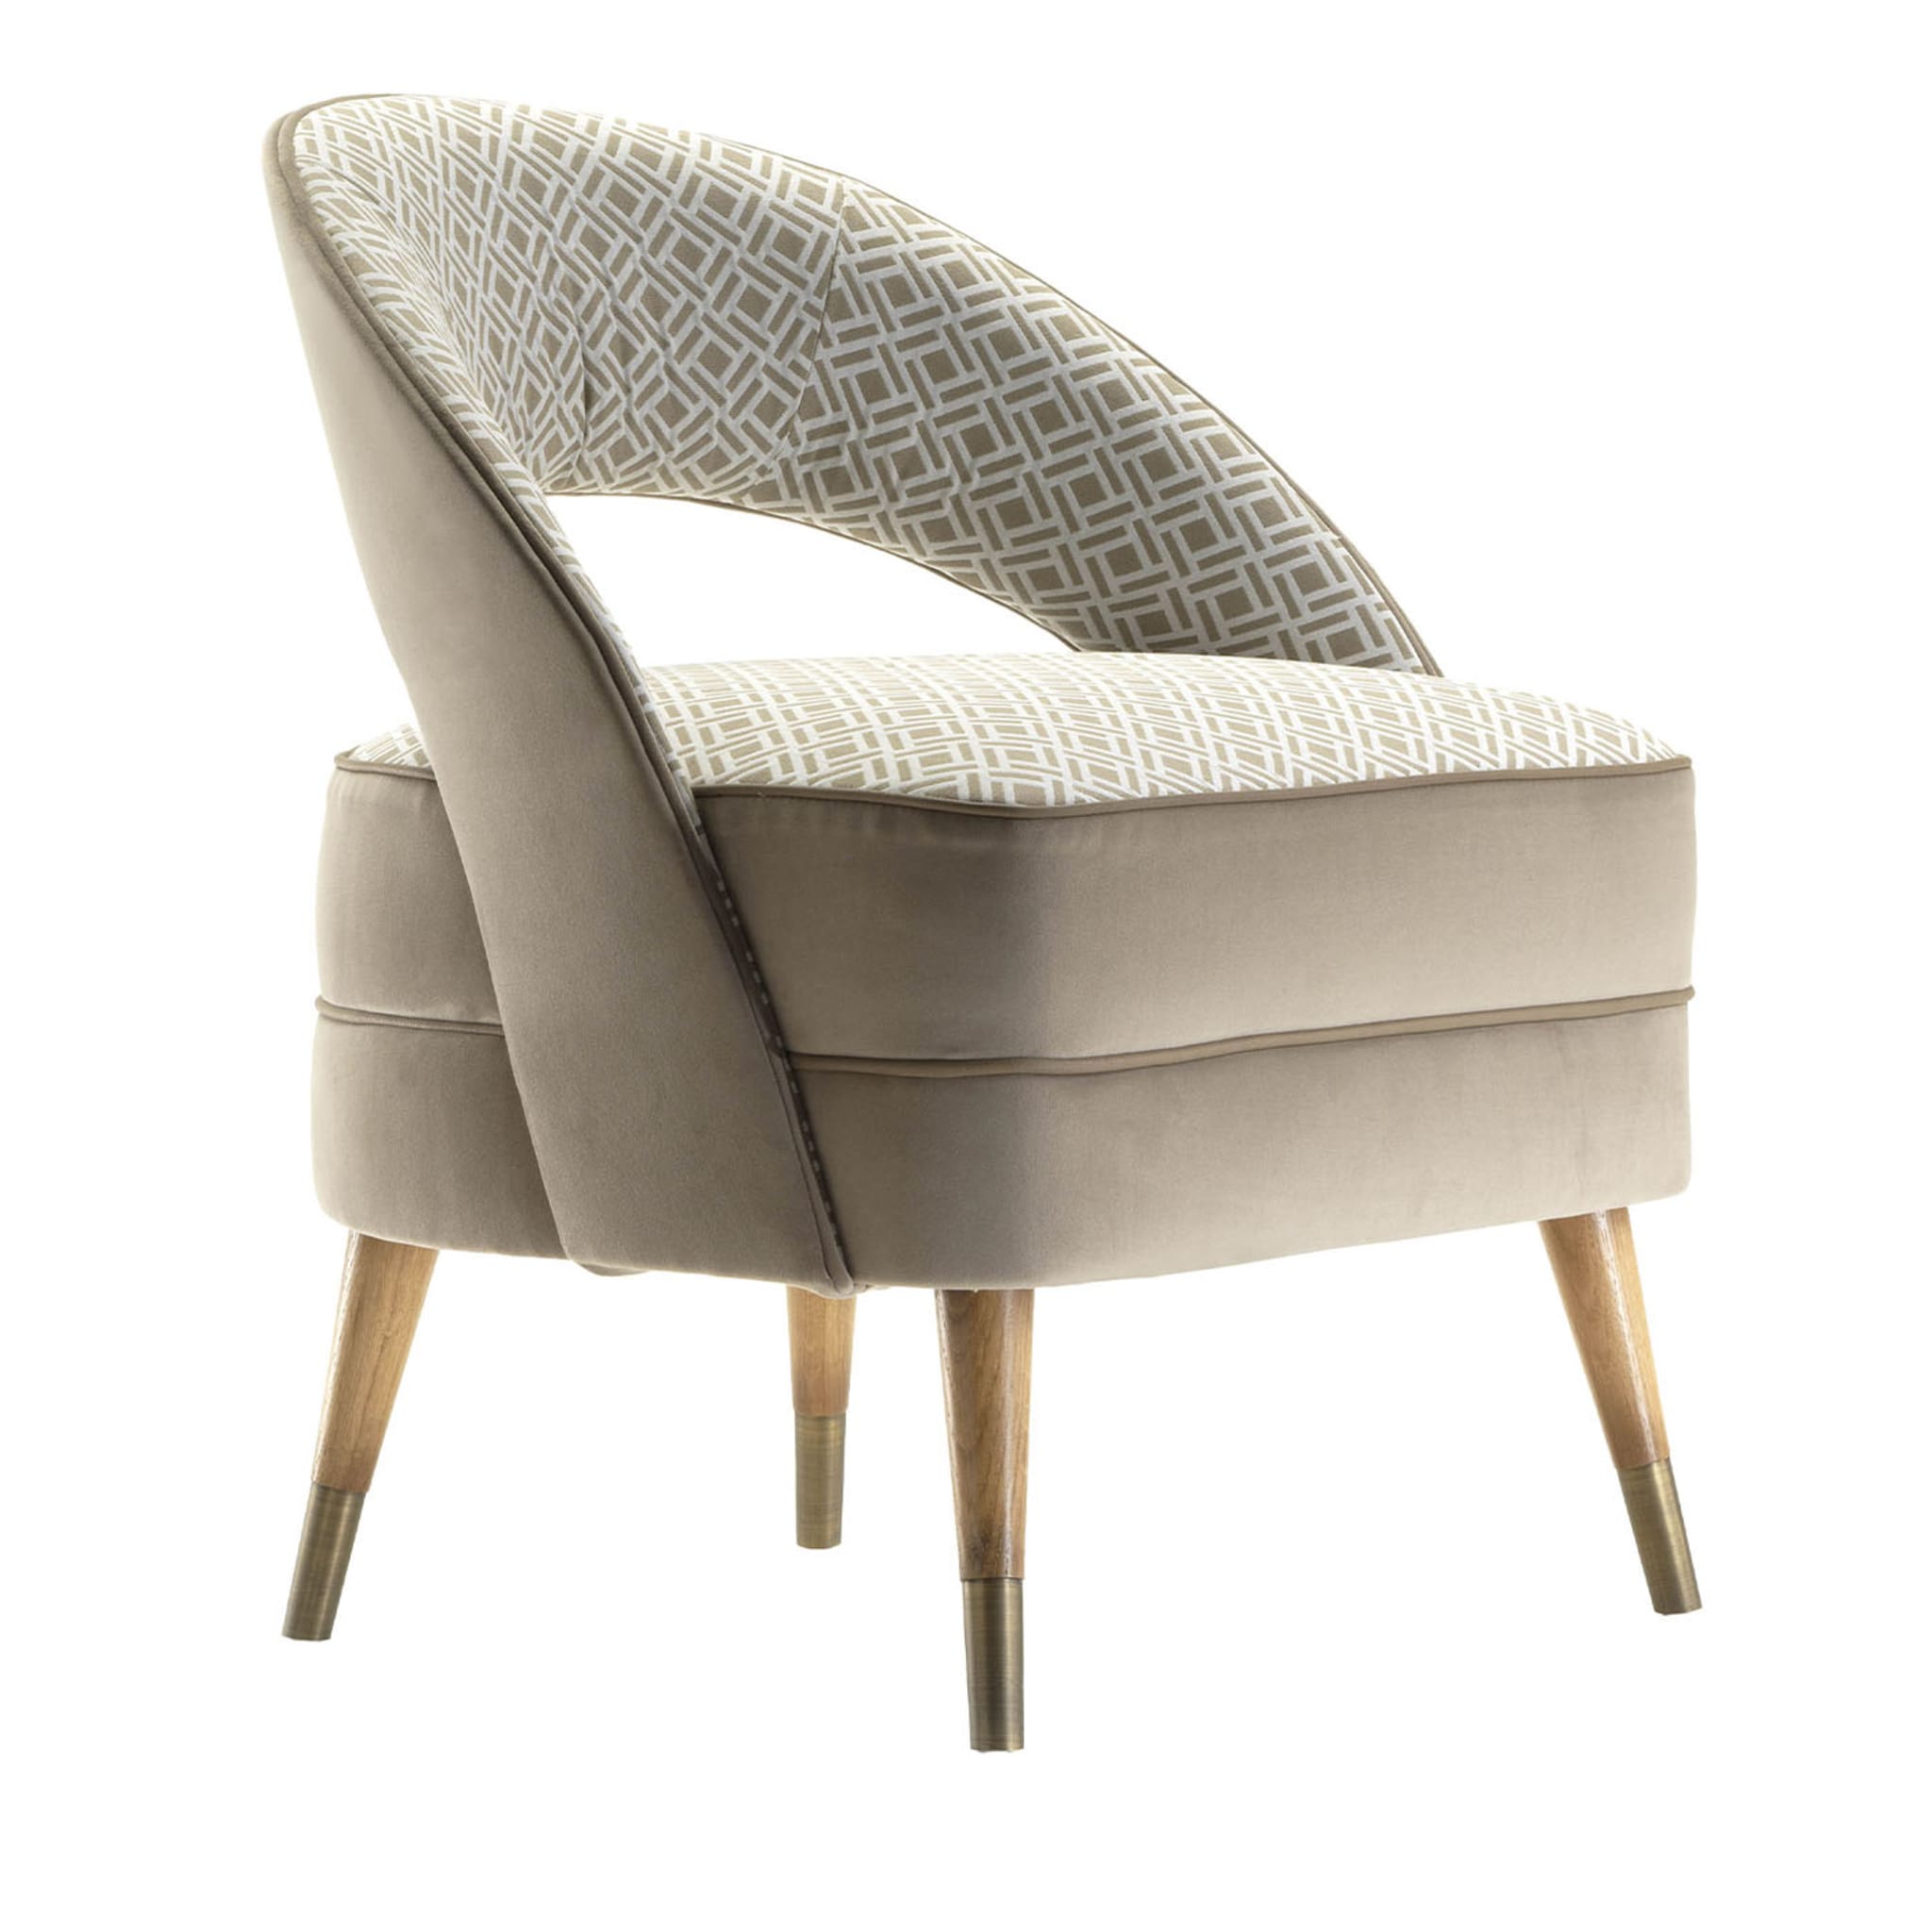 Olimpia Geometric-Patterned Taupe Armchair  - Main view